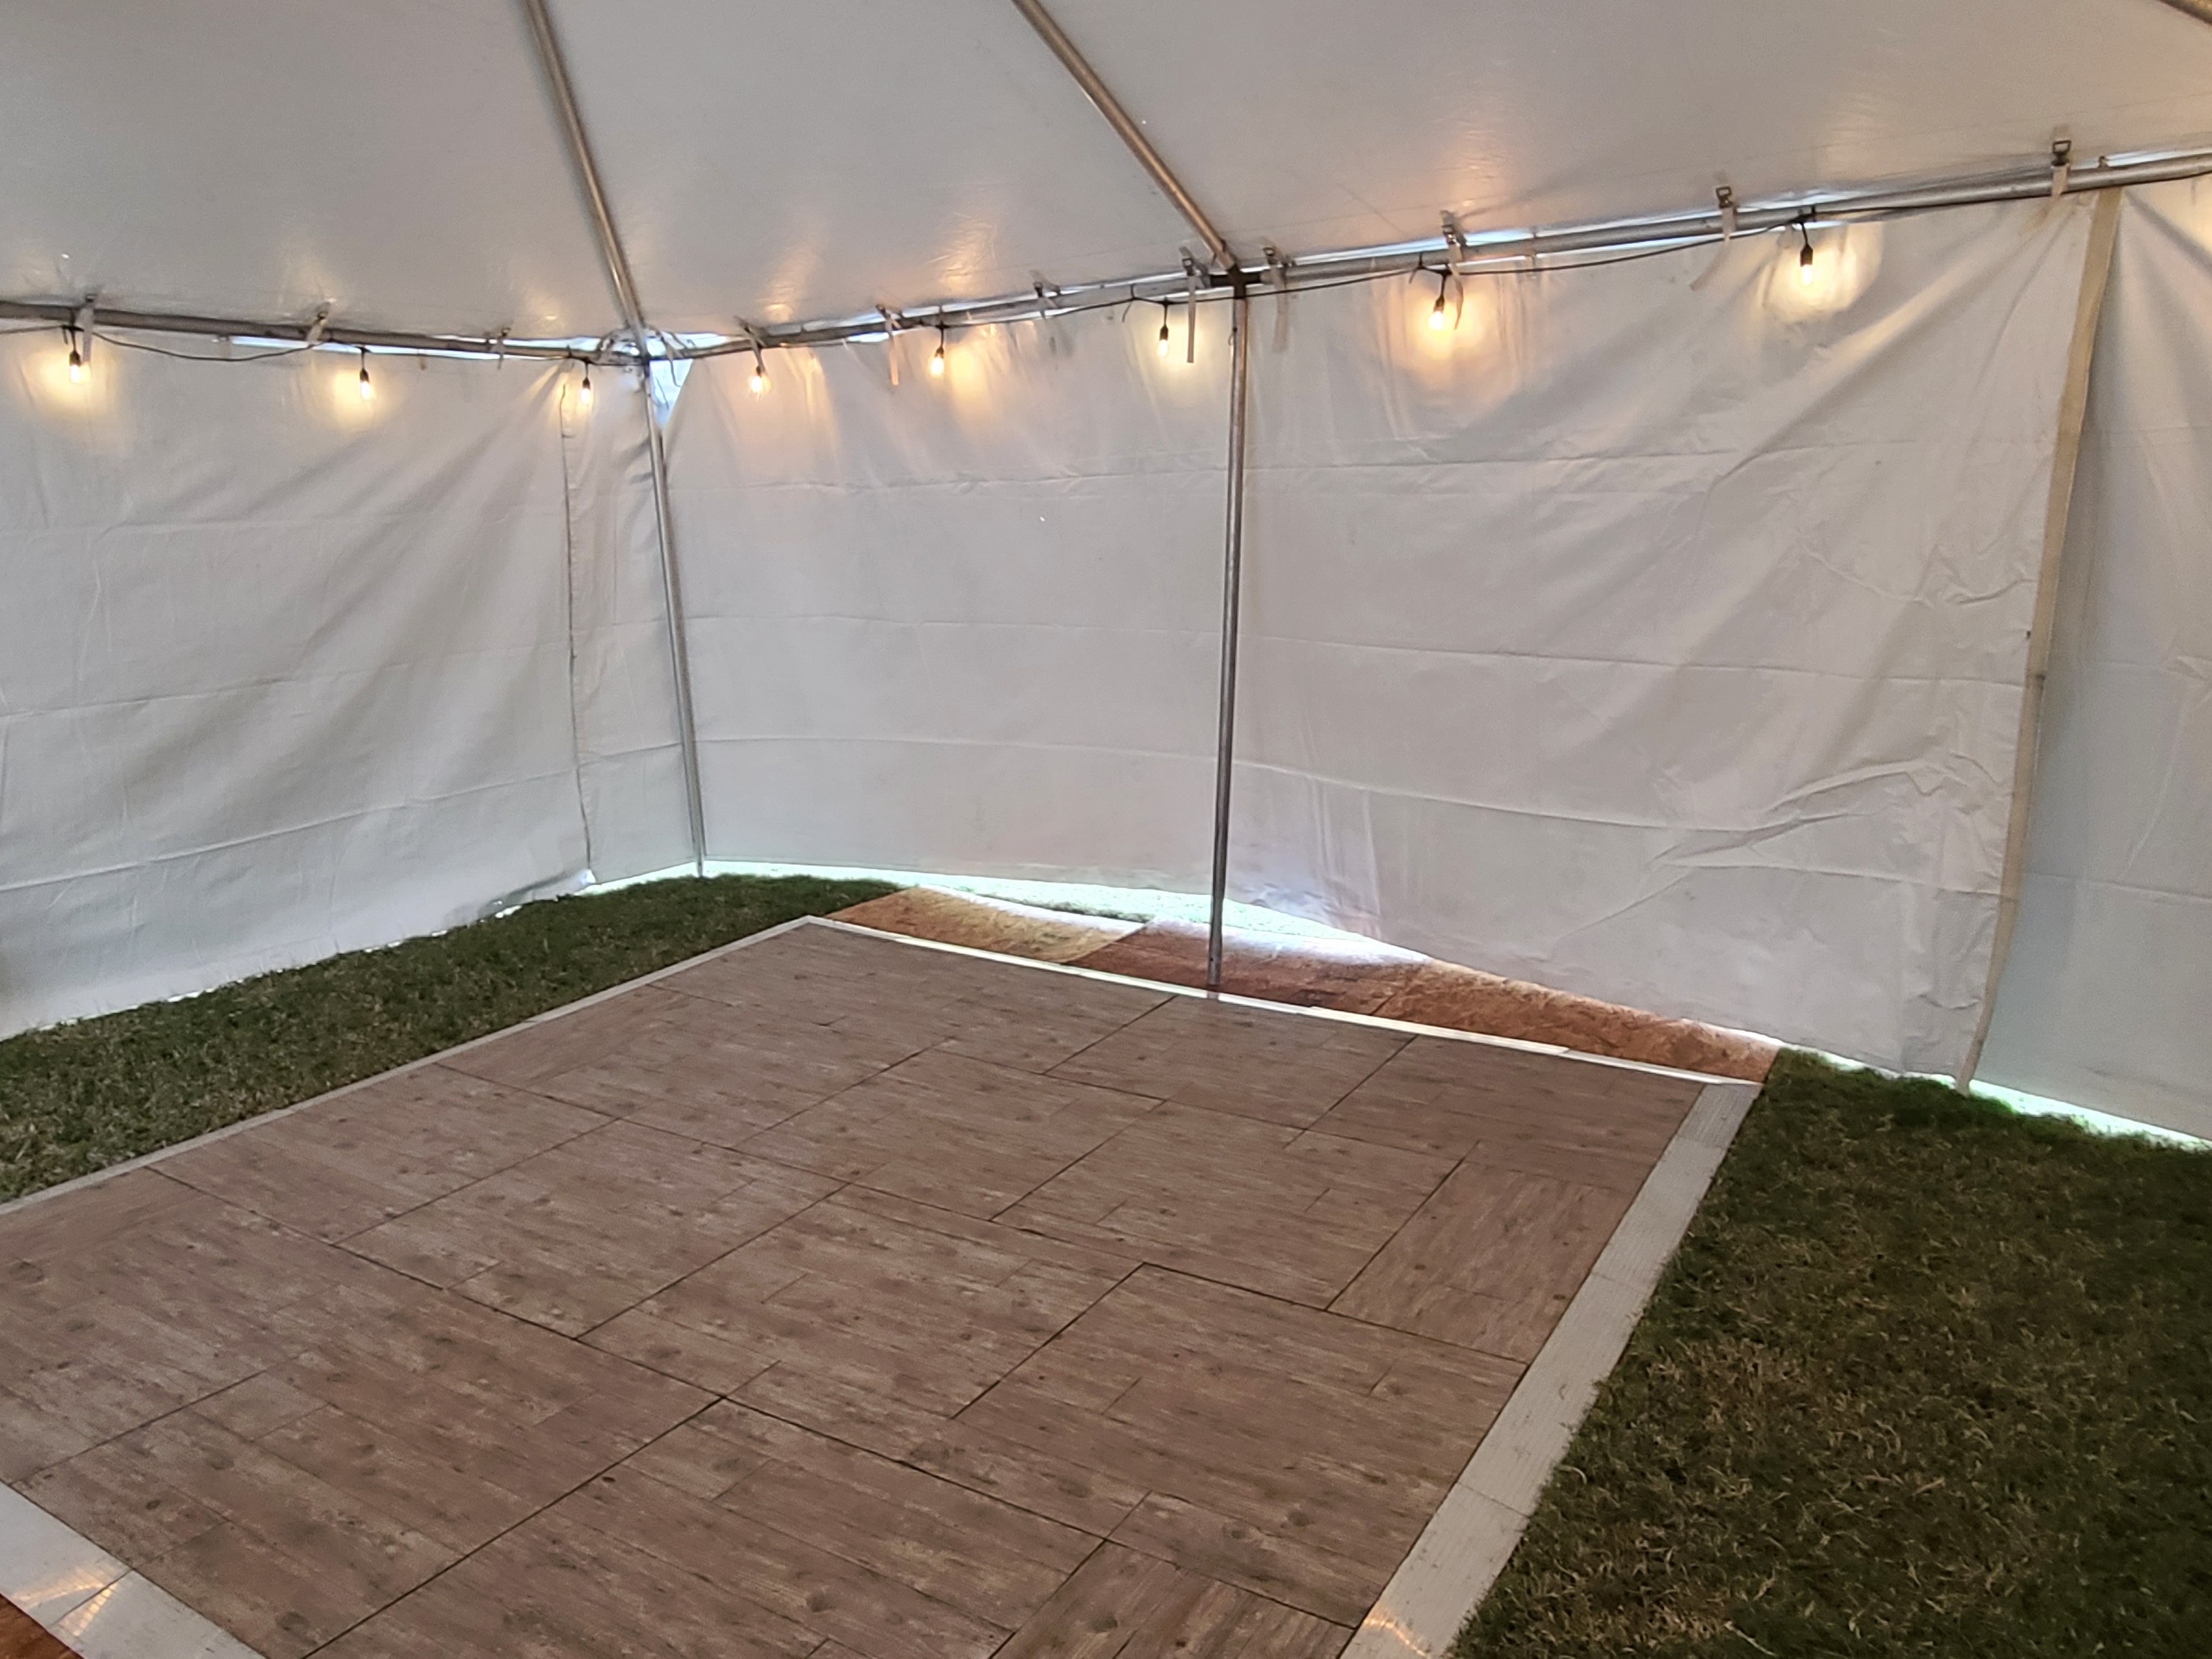 The Party Tent Rental Cypress TX Uses For All Events